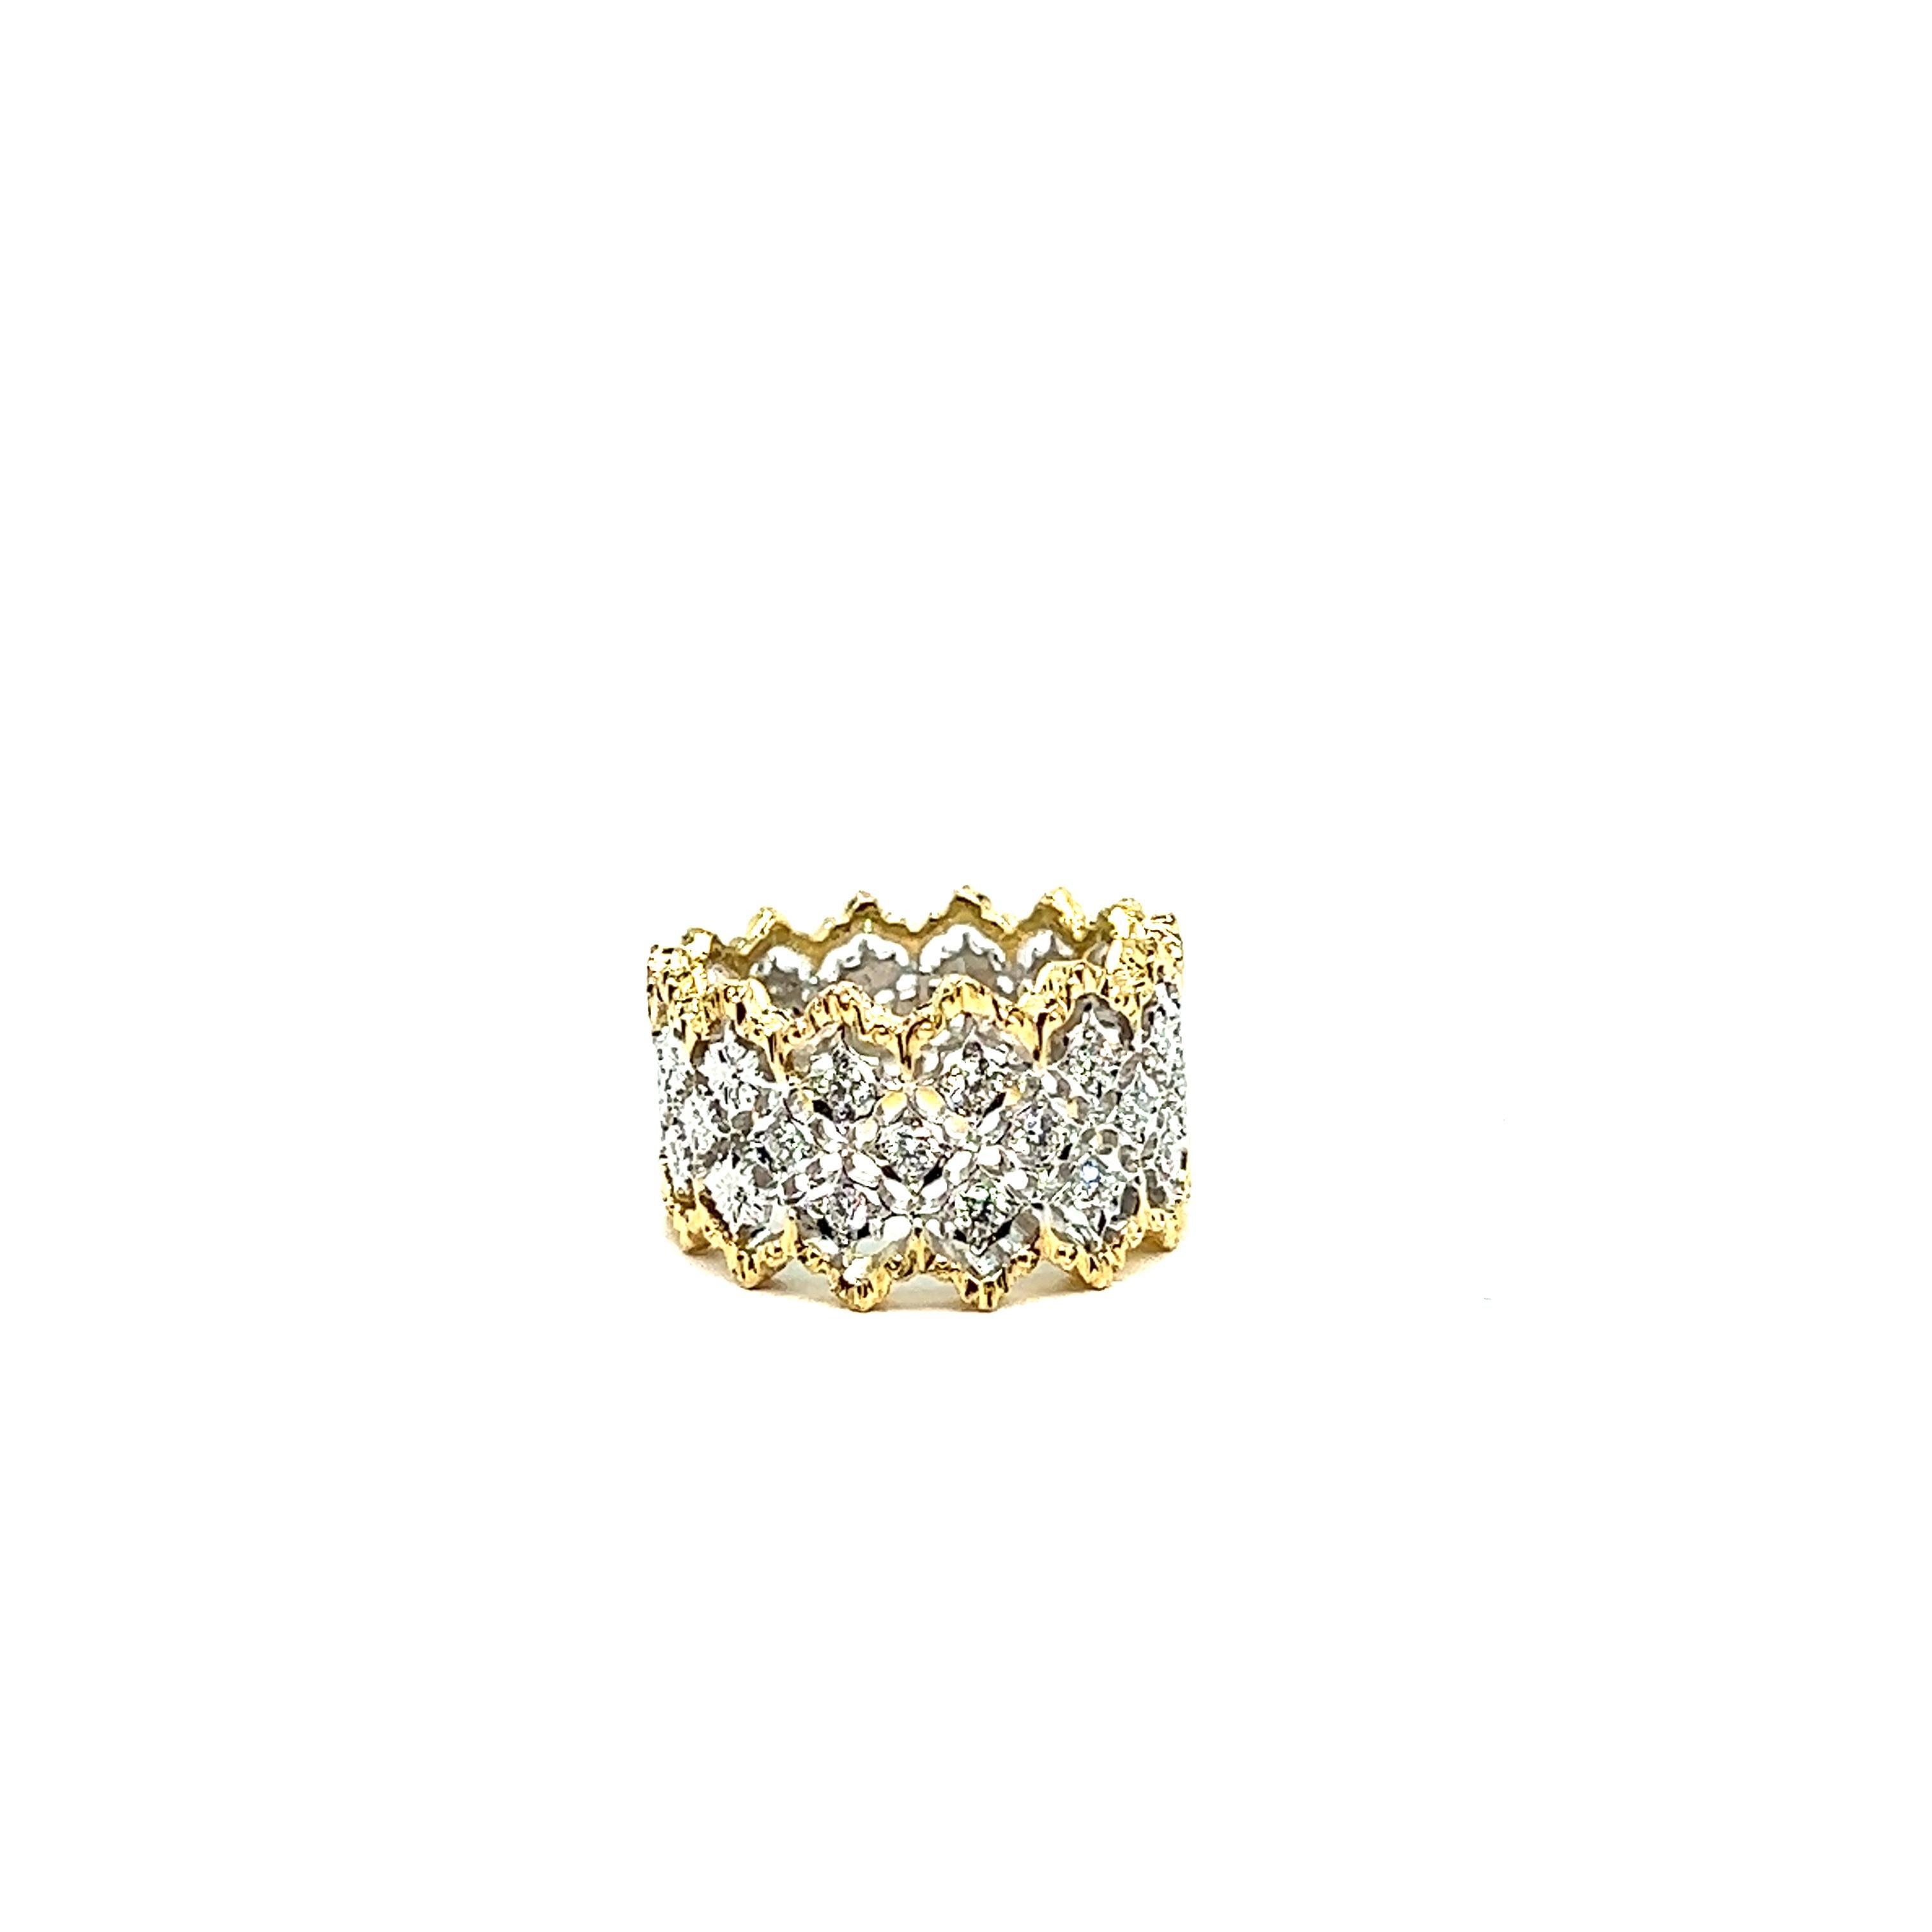 Women's Baroque Lace Ring with 13 Brilliant Cut Diamonds in 18K White and Yellow Gold